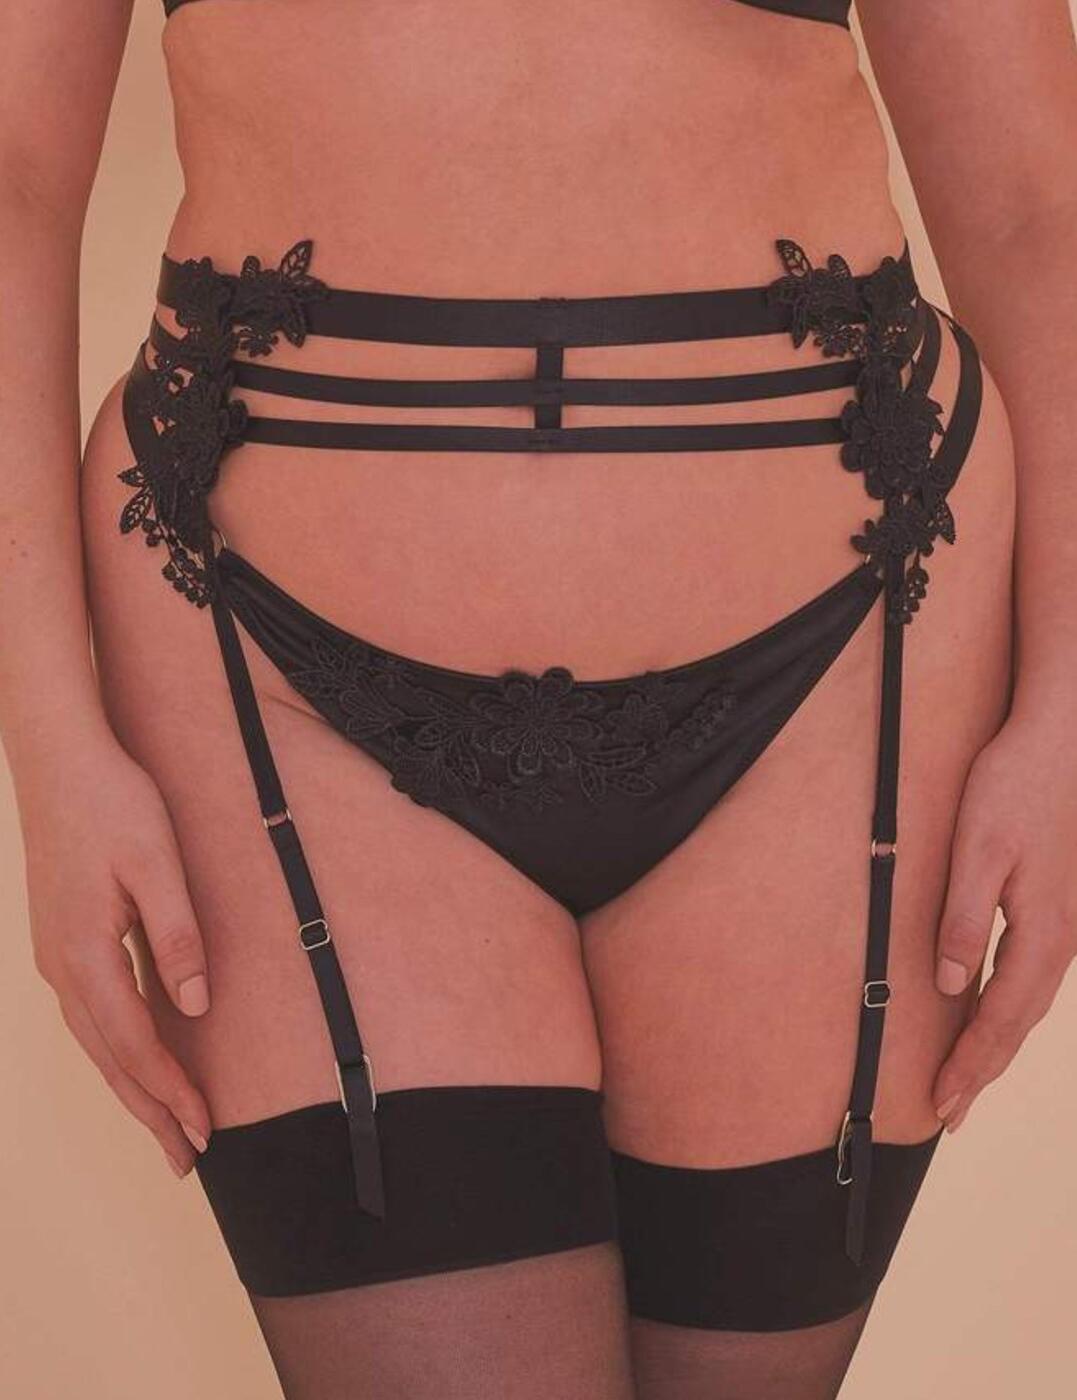 PPCCSB3151 Playful Promises Virginia Guipure Curve Suspender Belt - PPCCSB3151 Black